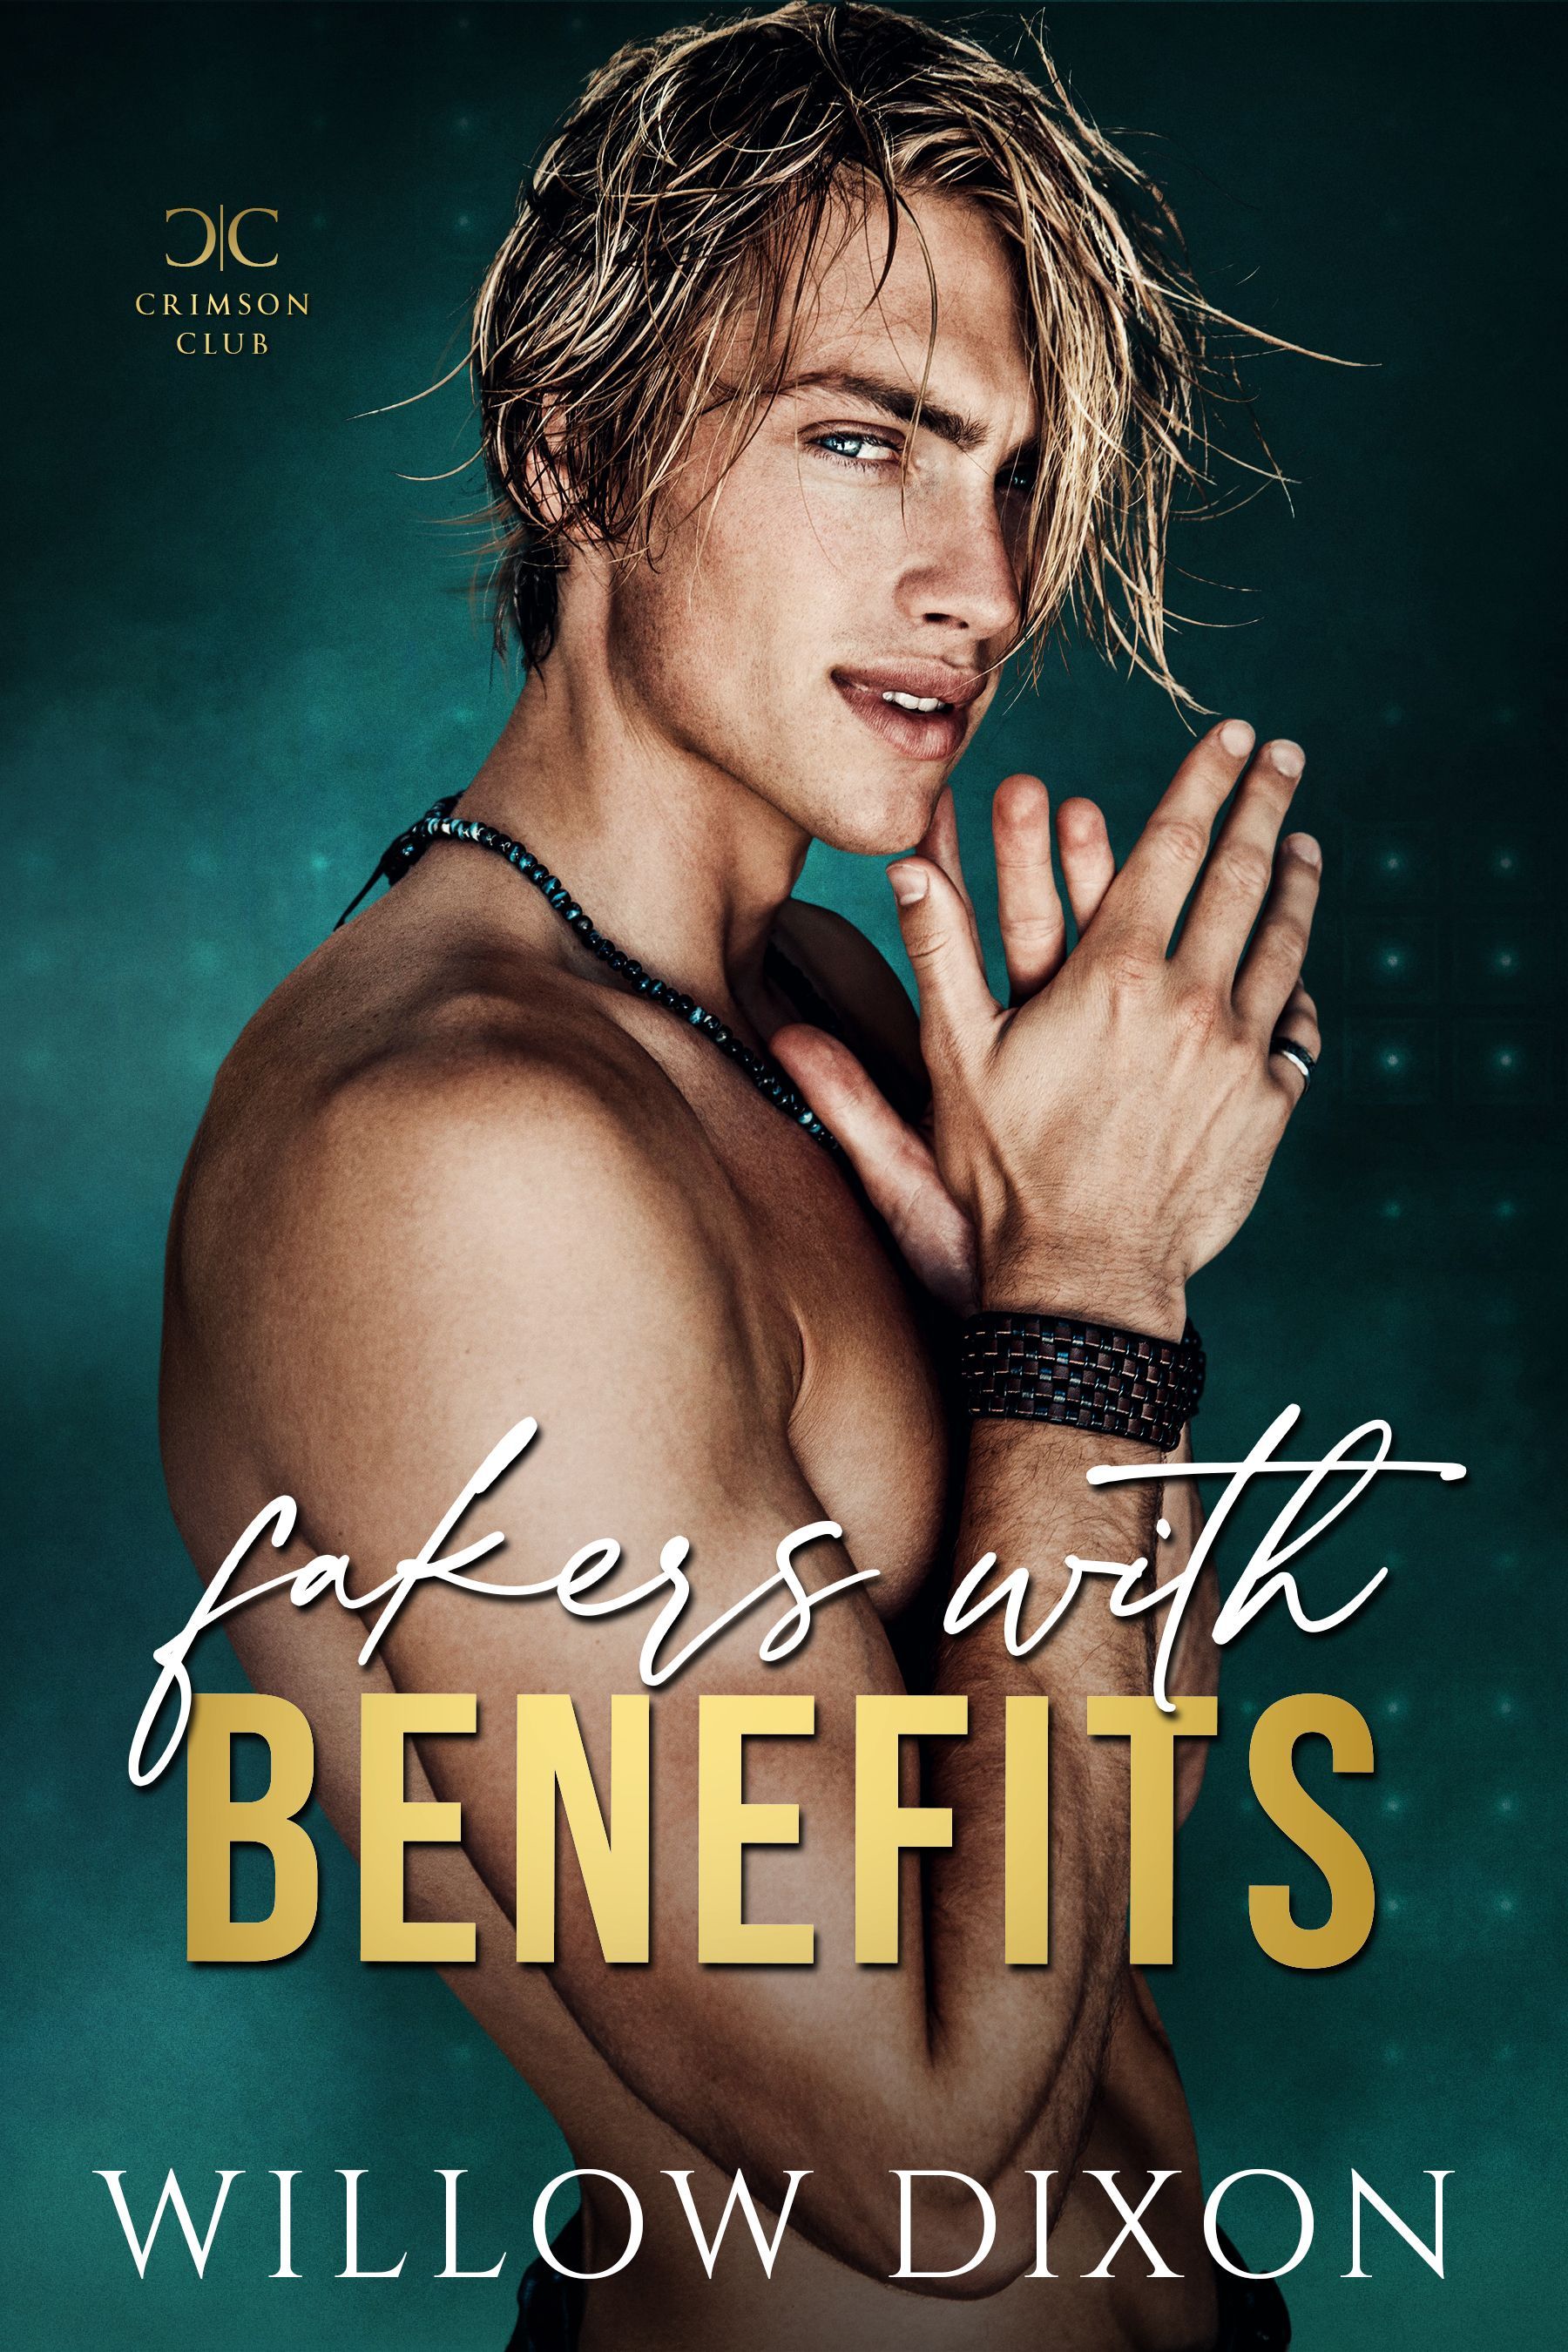 A book called fakers with benefits by willow dixon